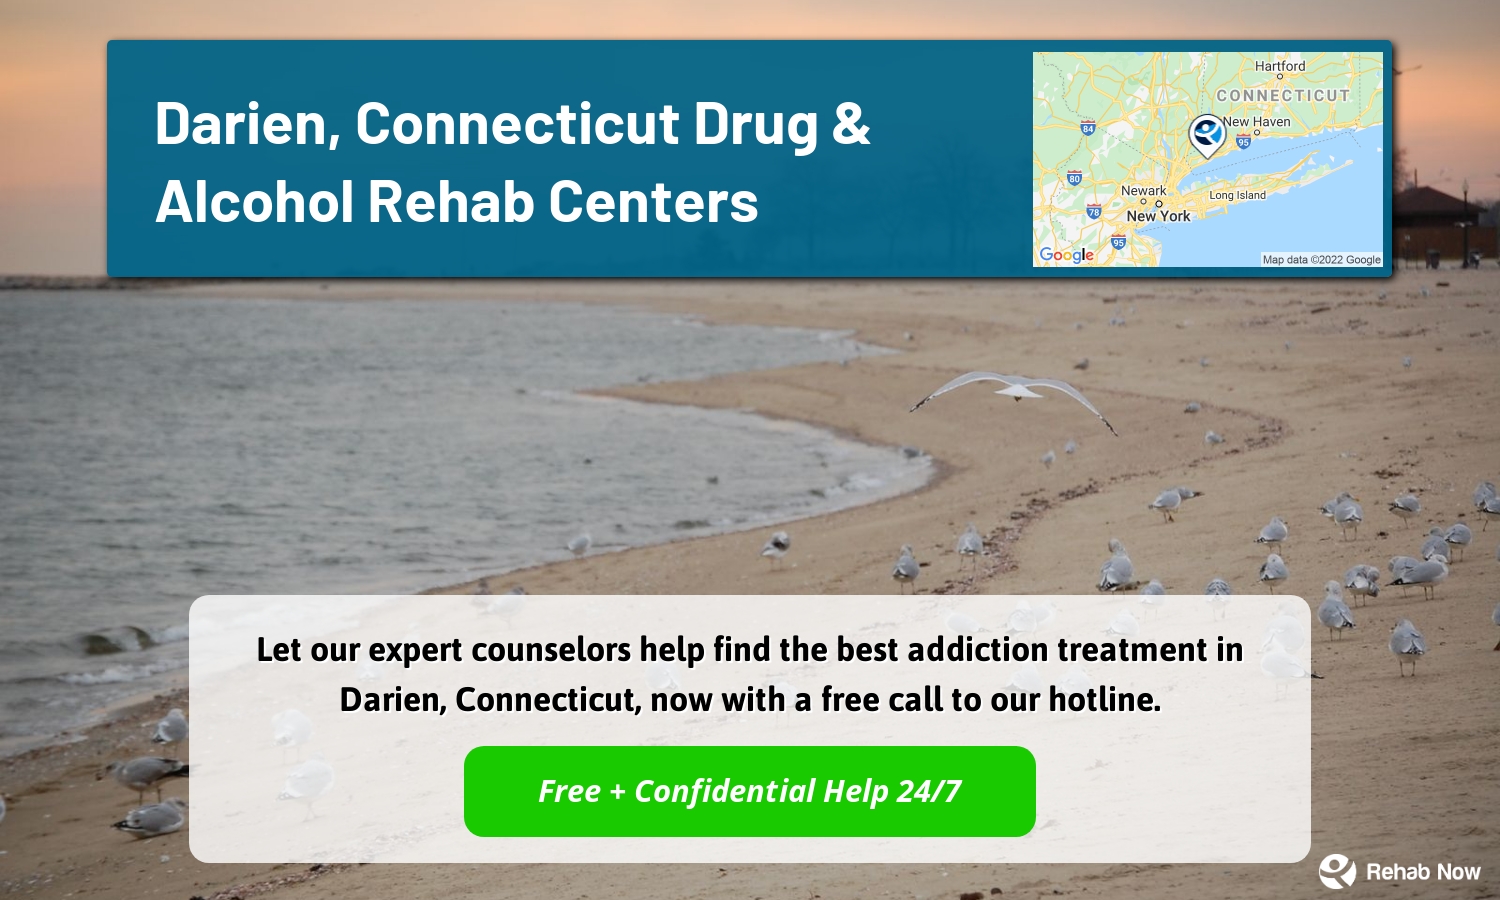 Let our expert counselors help find the best addiction treatment in Darien, Connecticut, now with a free call to our hotline.